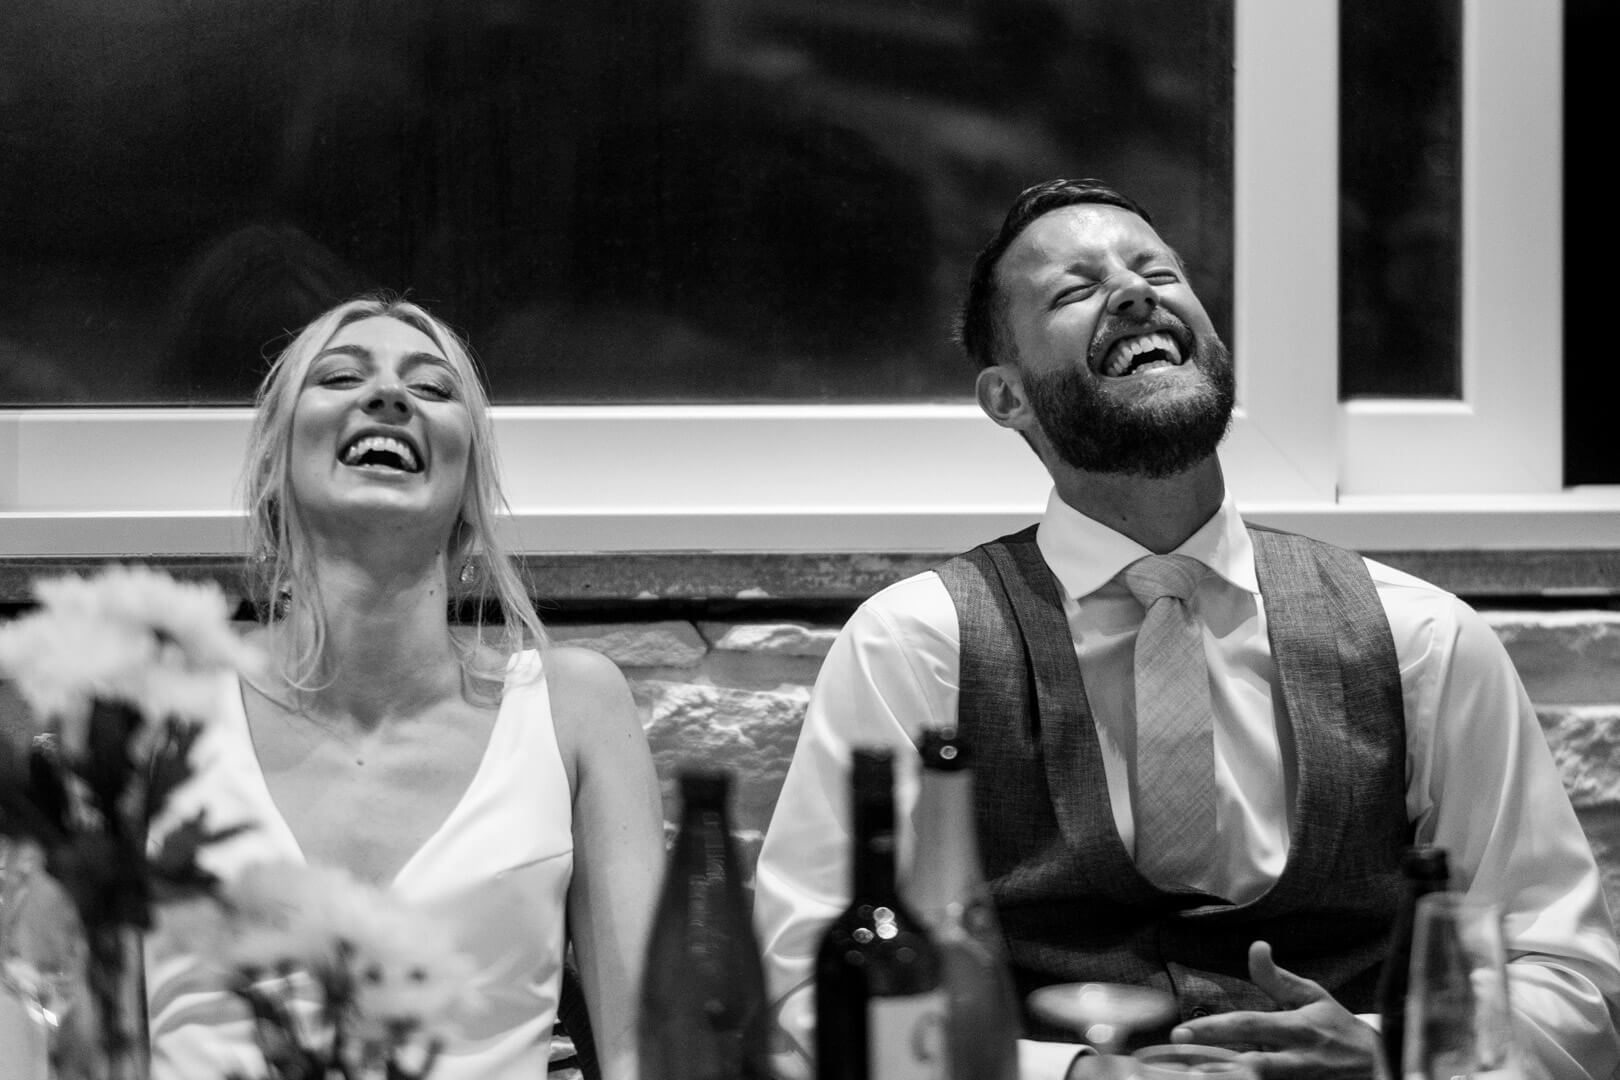 Heartfelt laughter as the couple listens to a speech, capturing a joyous and intimate moment